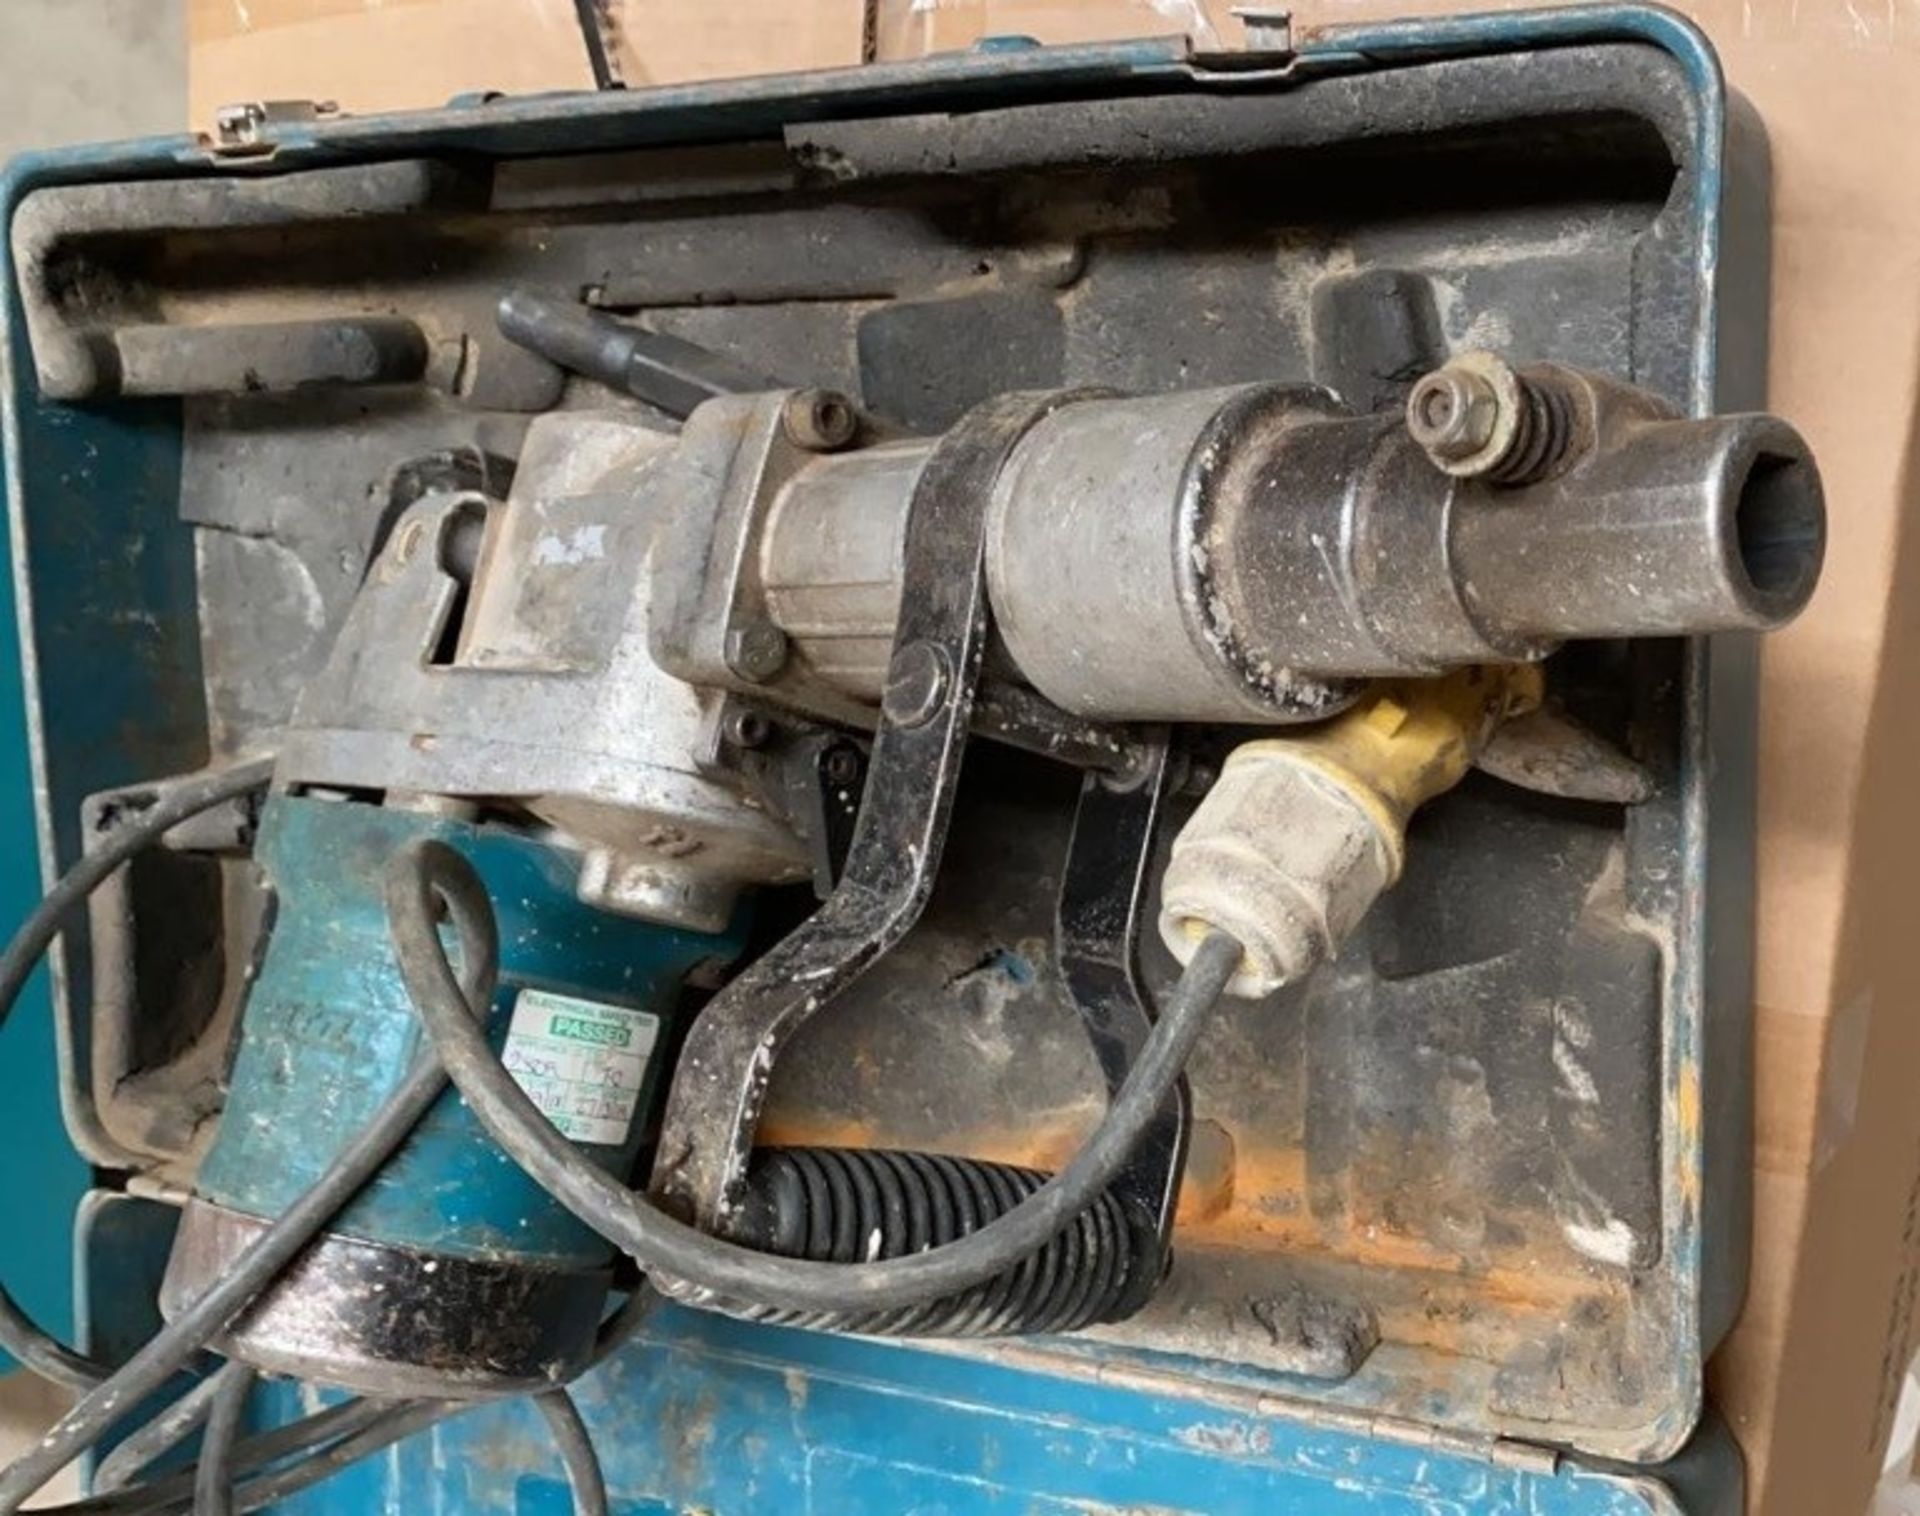 1 x Makita 110V High Impact Drill - Used, Recently Removed From A Working Site - CL505 - Ref: